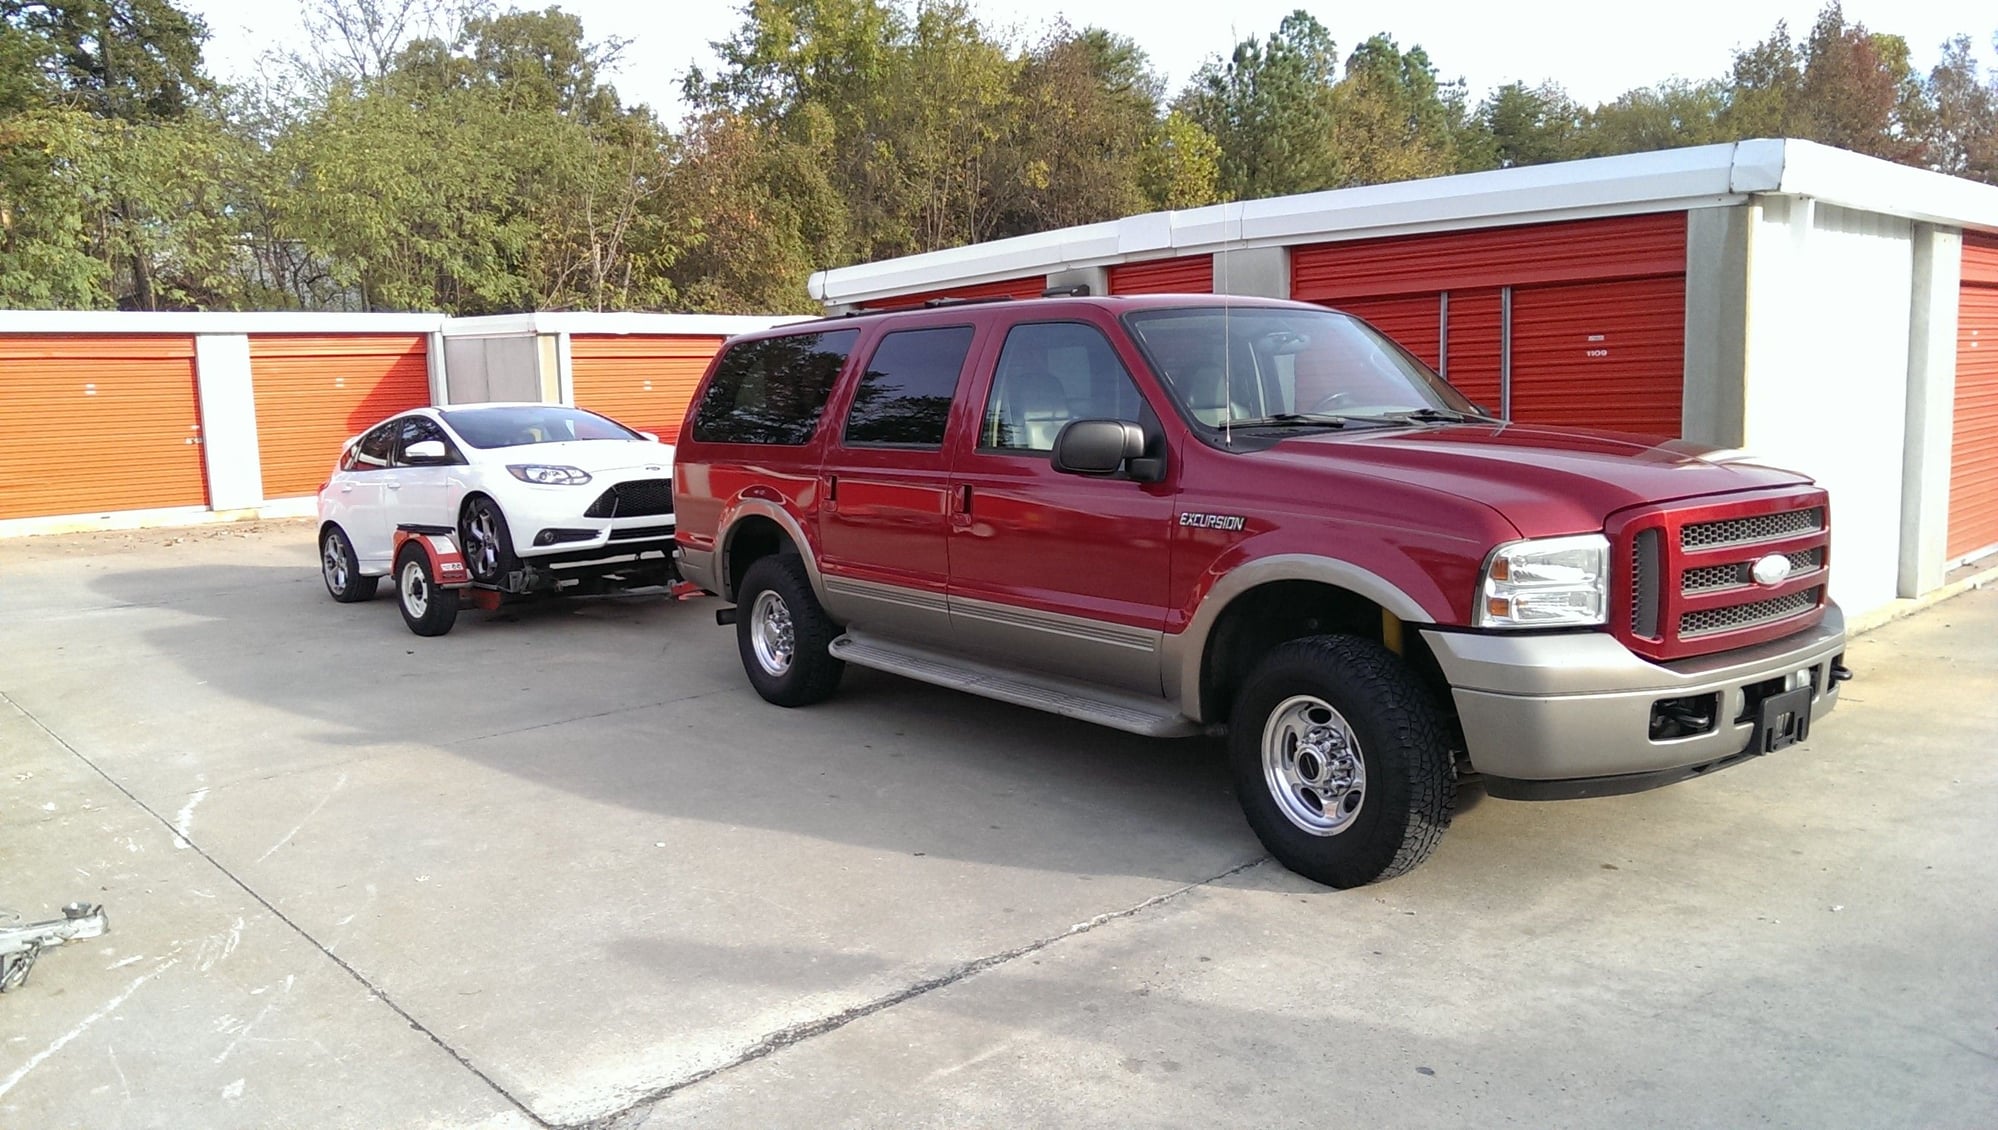 Purchased a 2005 Ford Excursion Eddie Bauer PSD 4x4 last November. 